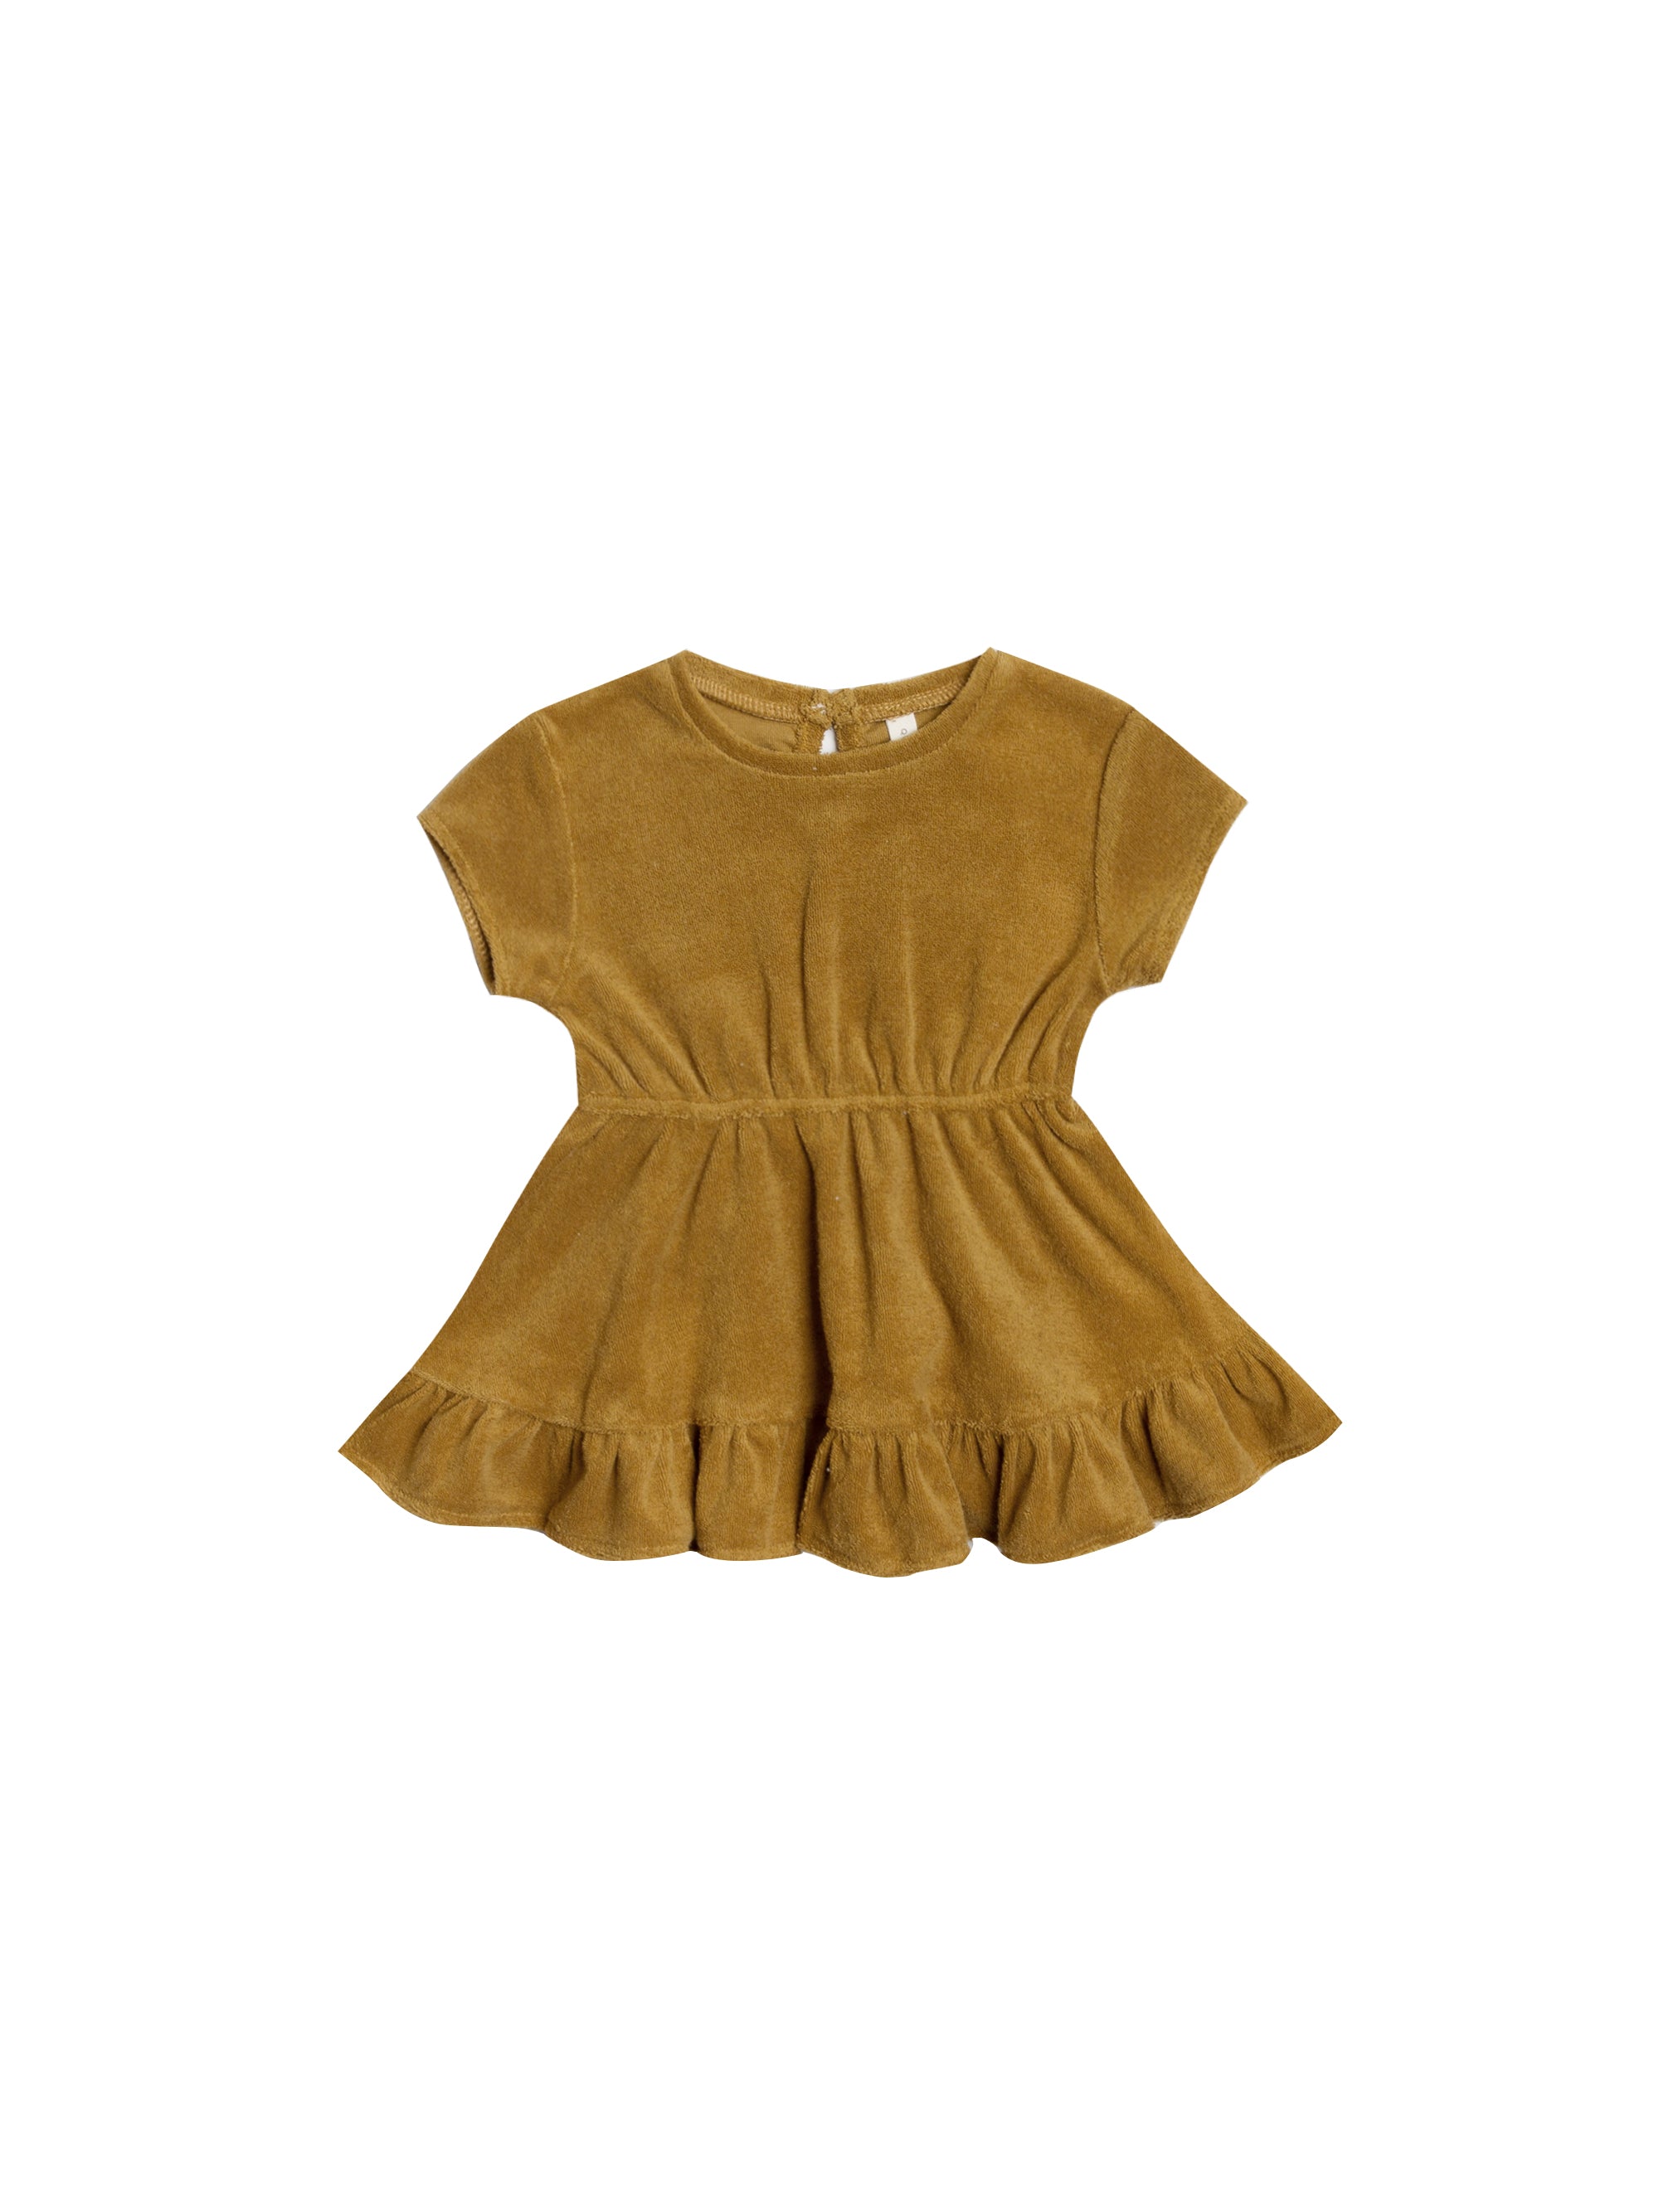 QUINCY MAE TERRY DRESS / ocre